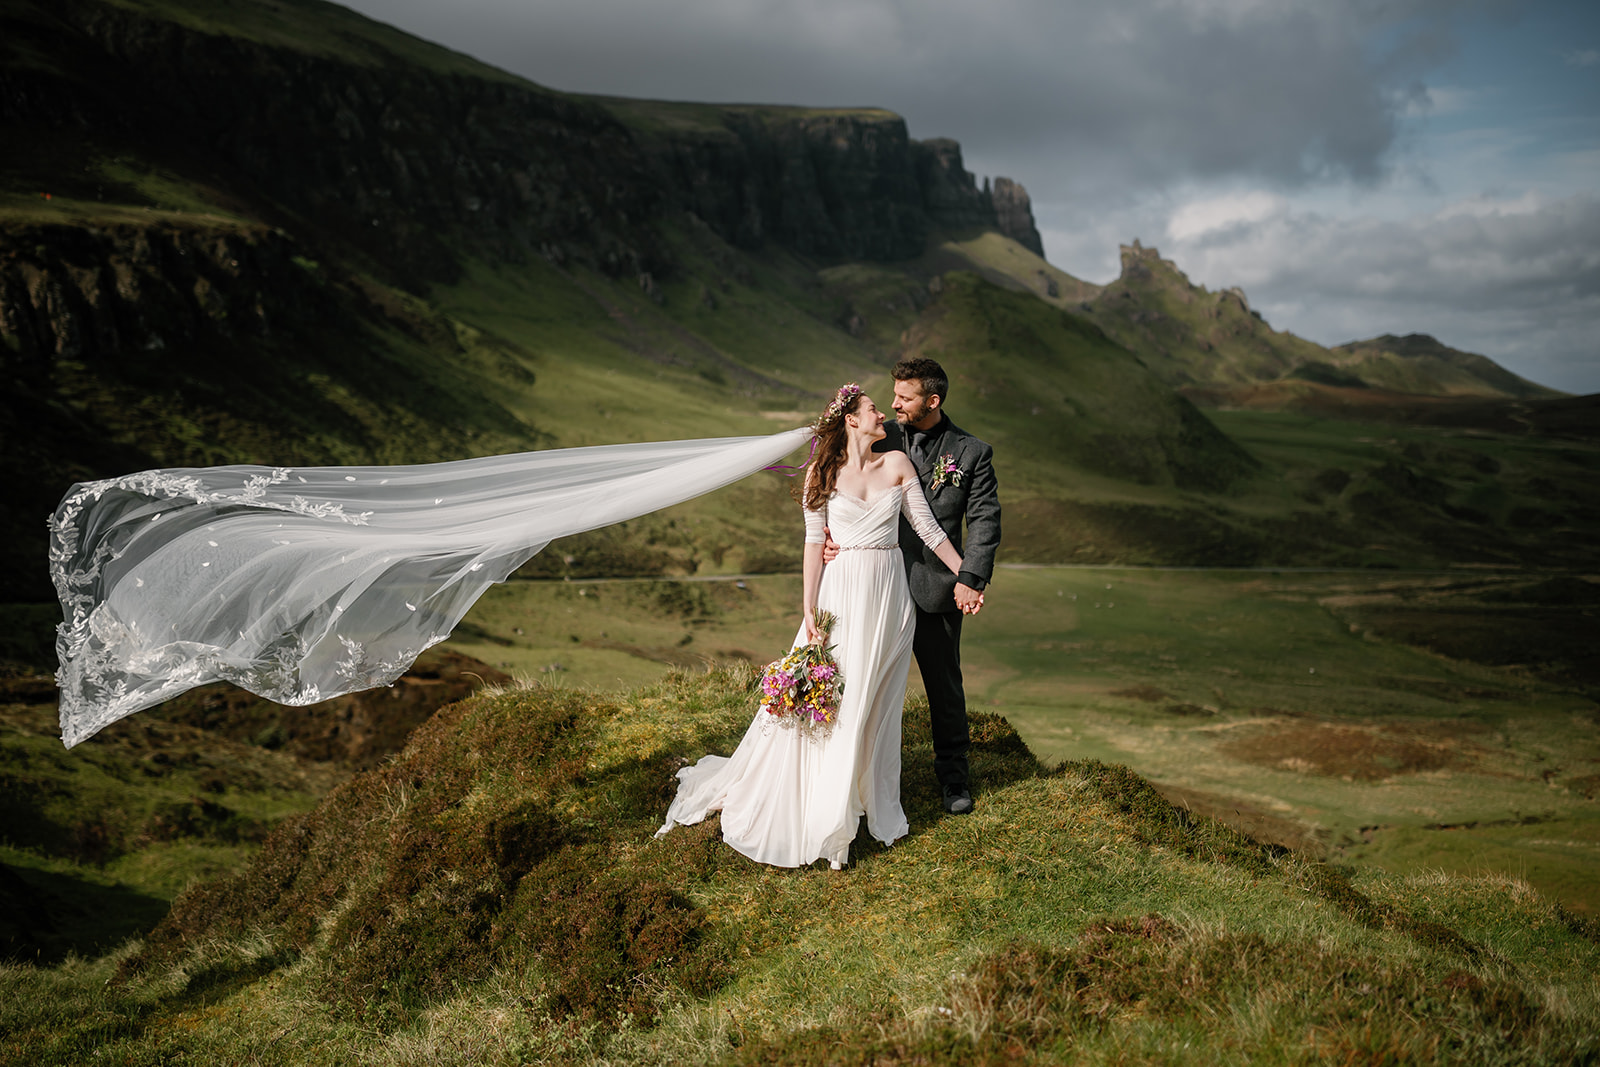 Becca and Nick, framed by the beautiful Quiraing, share a moment of pure joy during their elopement day